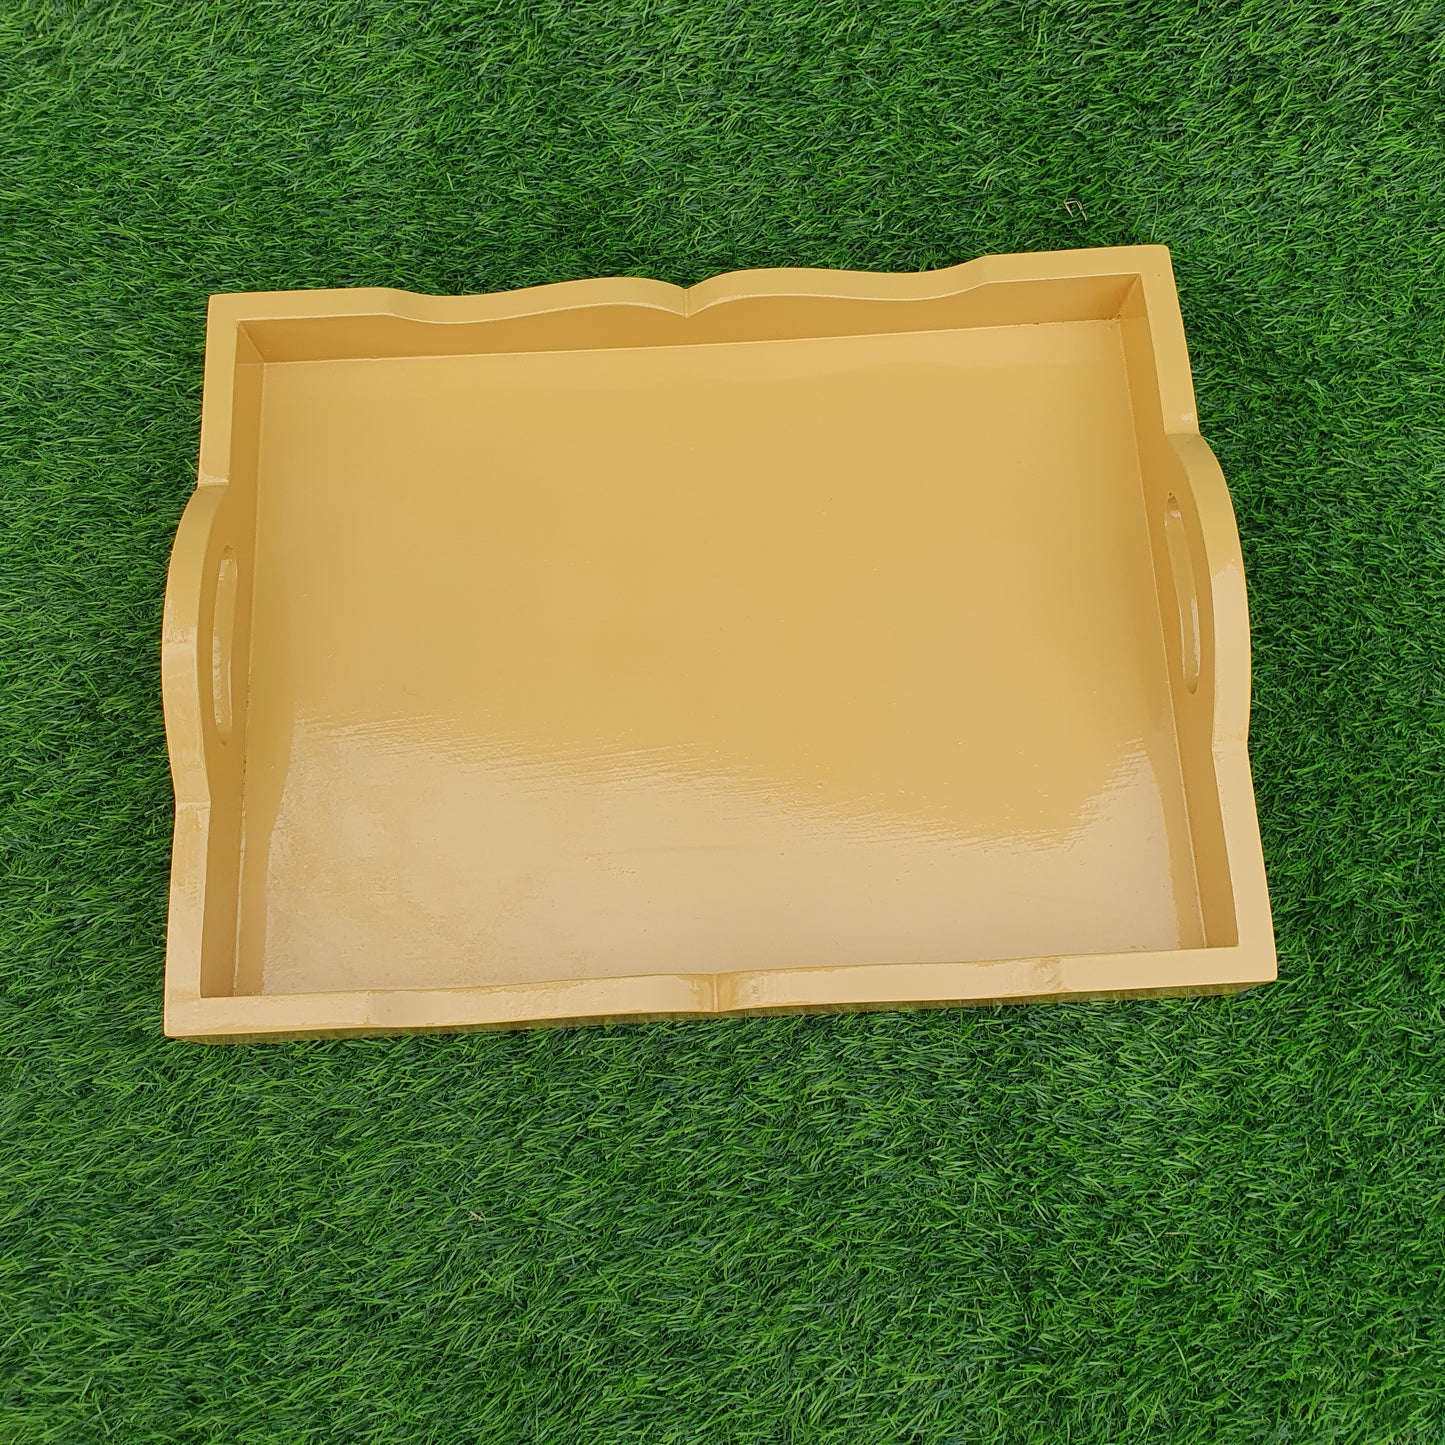 Wooden Tray (D-5)